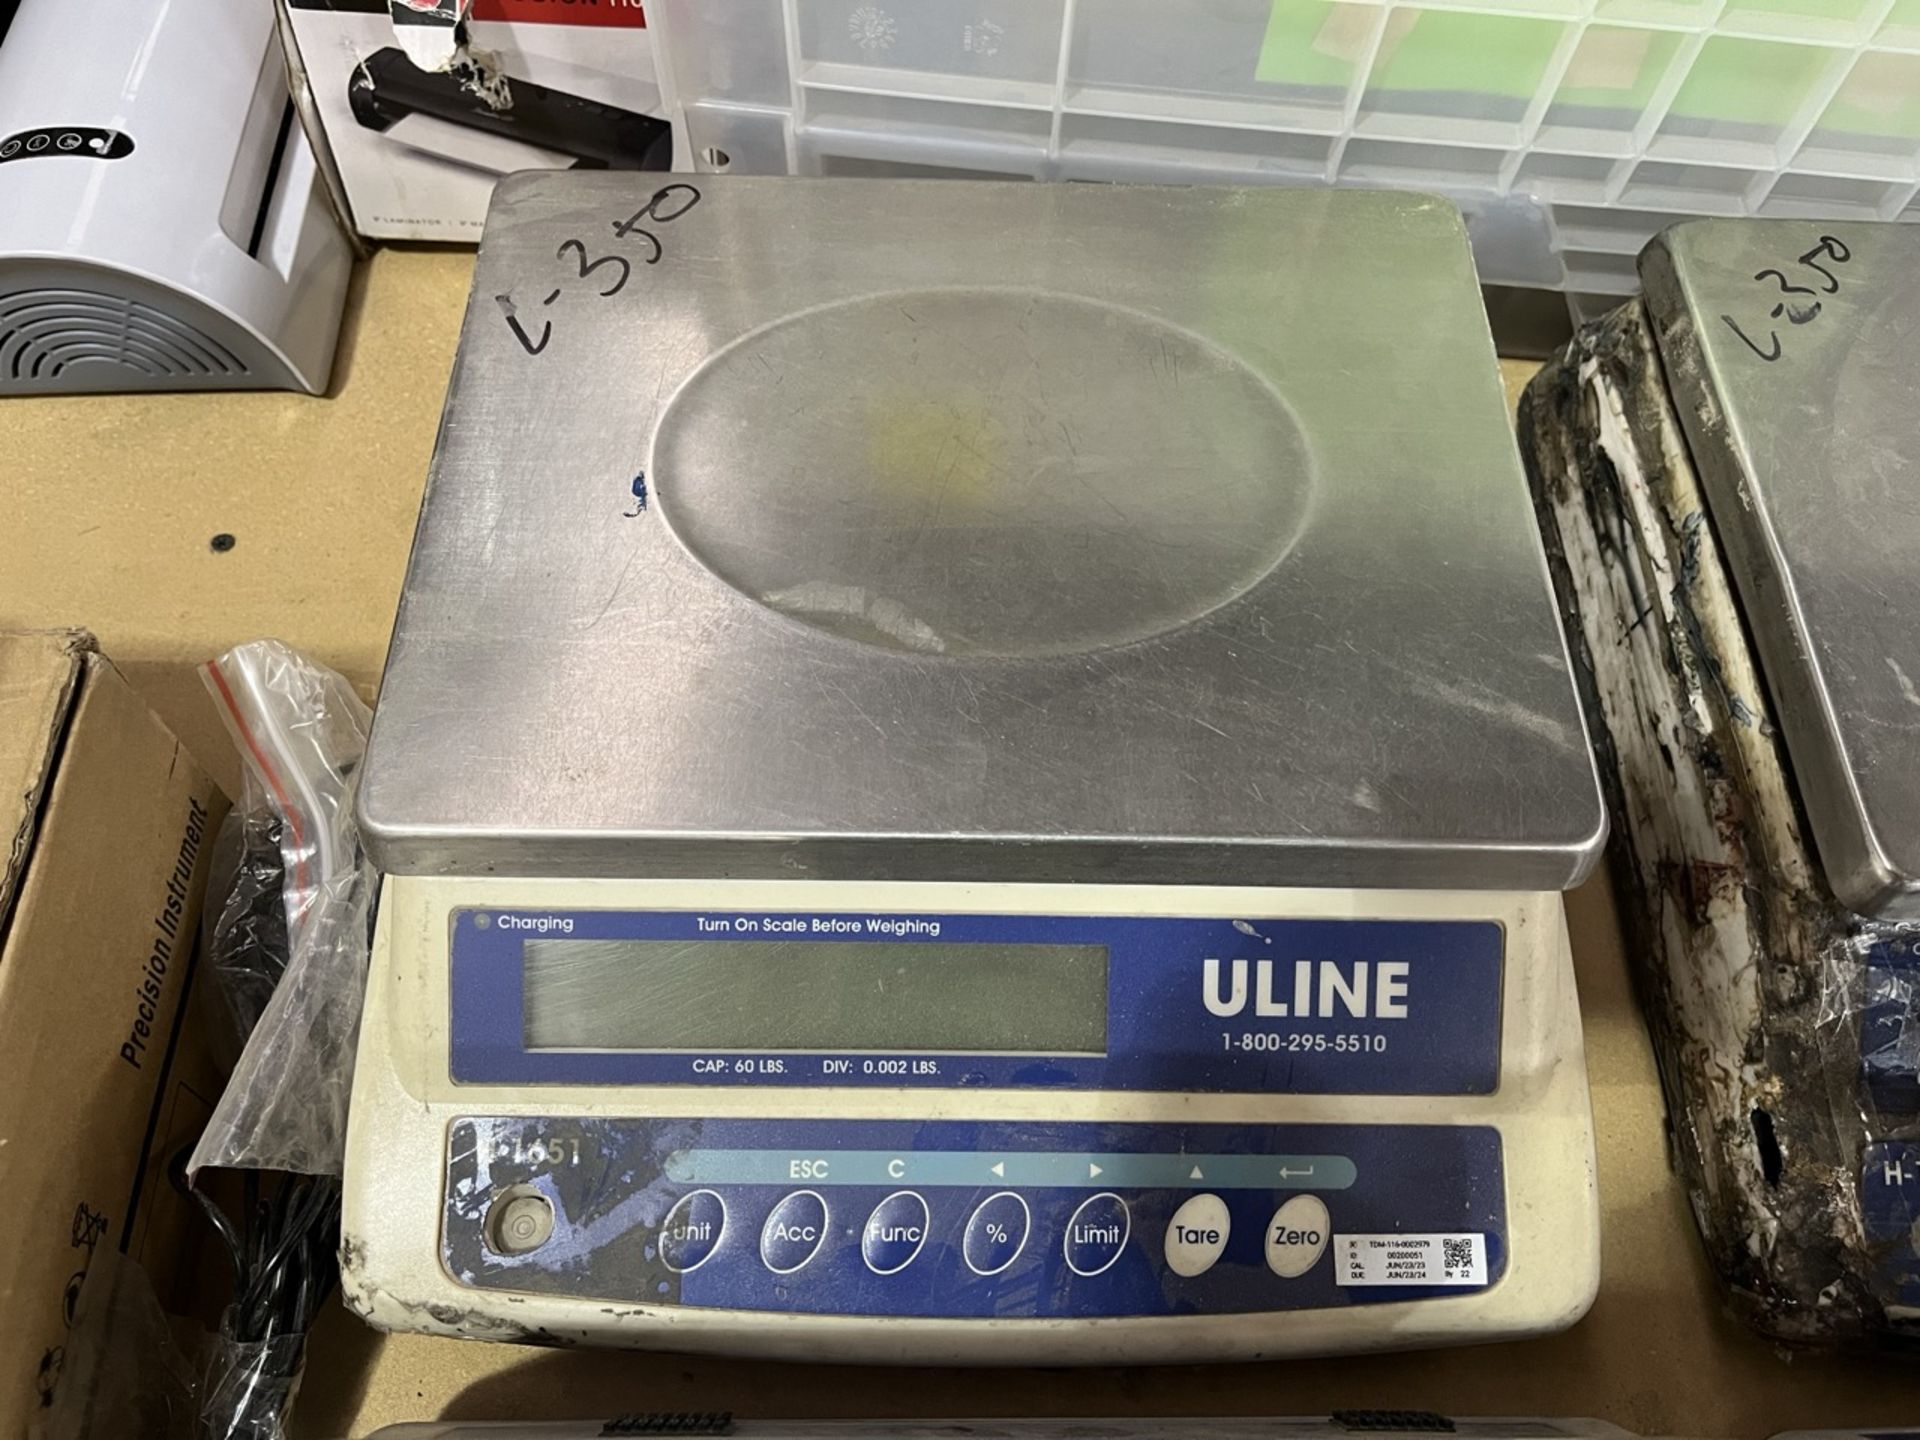 Lot of 4 pieces contains: 3 Uline Precision Electronic Scales, model H-1651; 1 Uline Precision Elec - Image 4 of 11